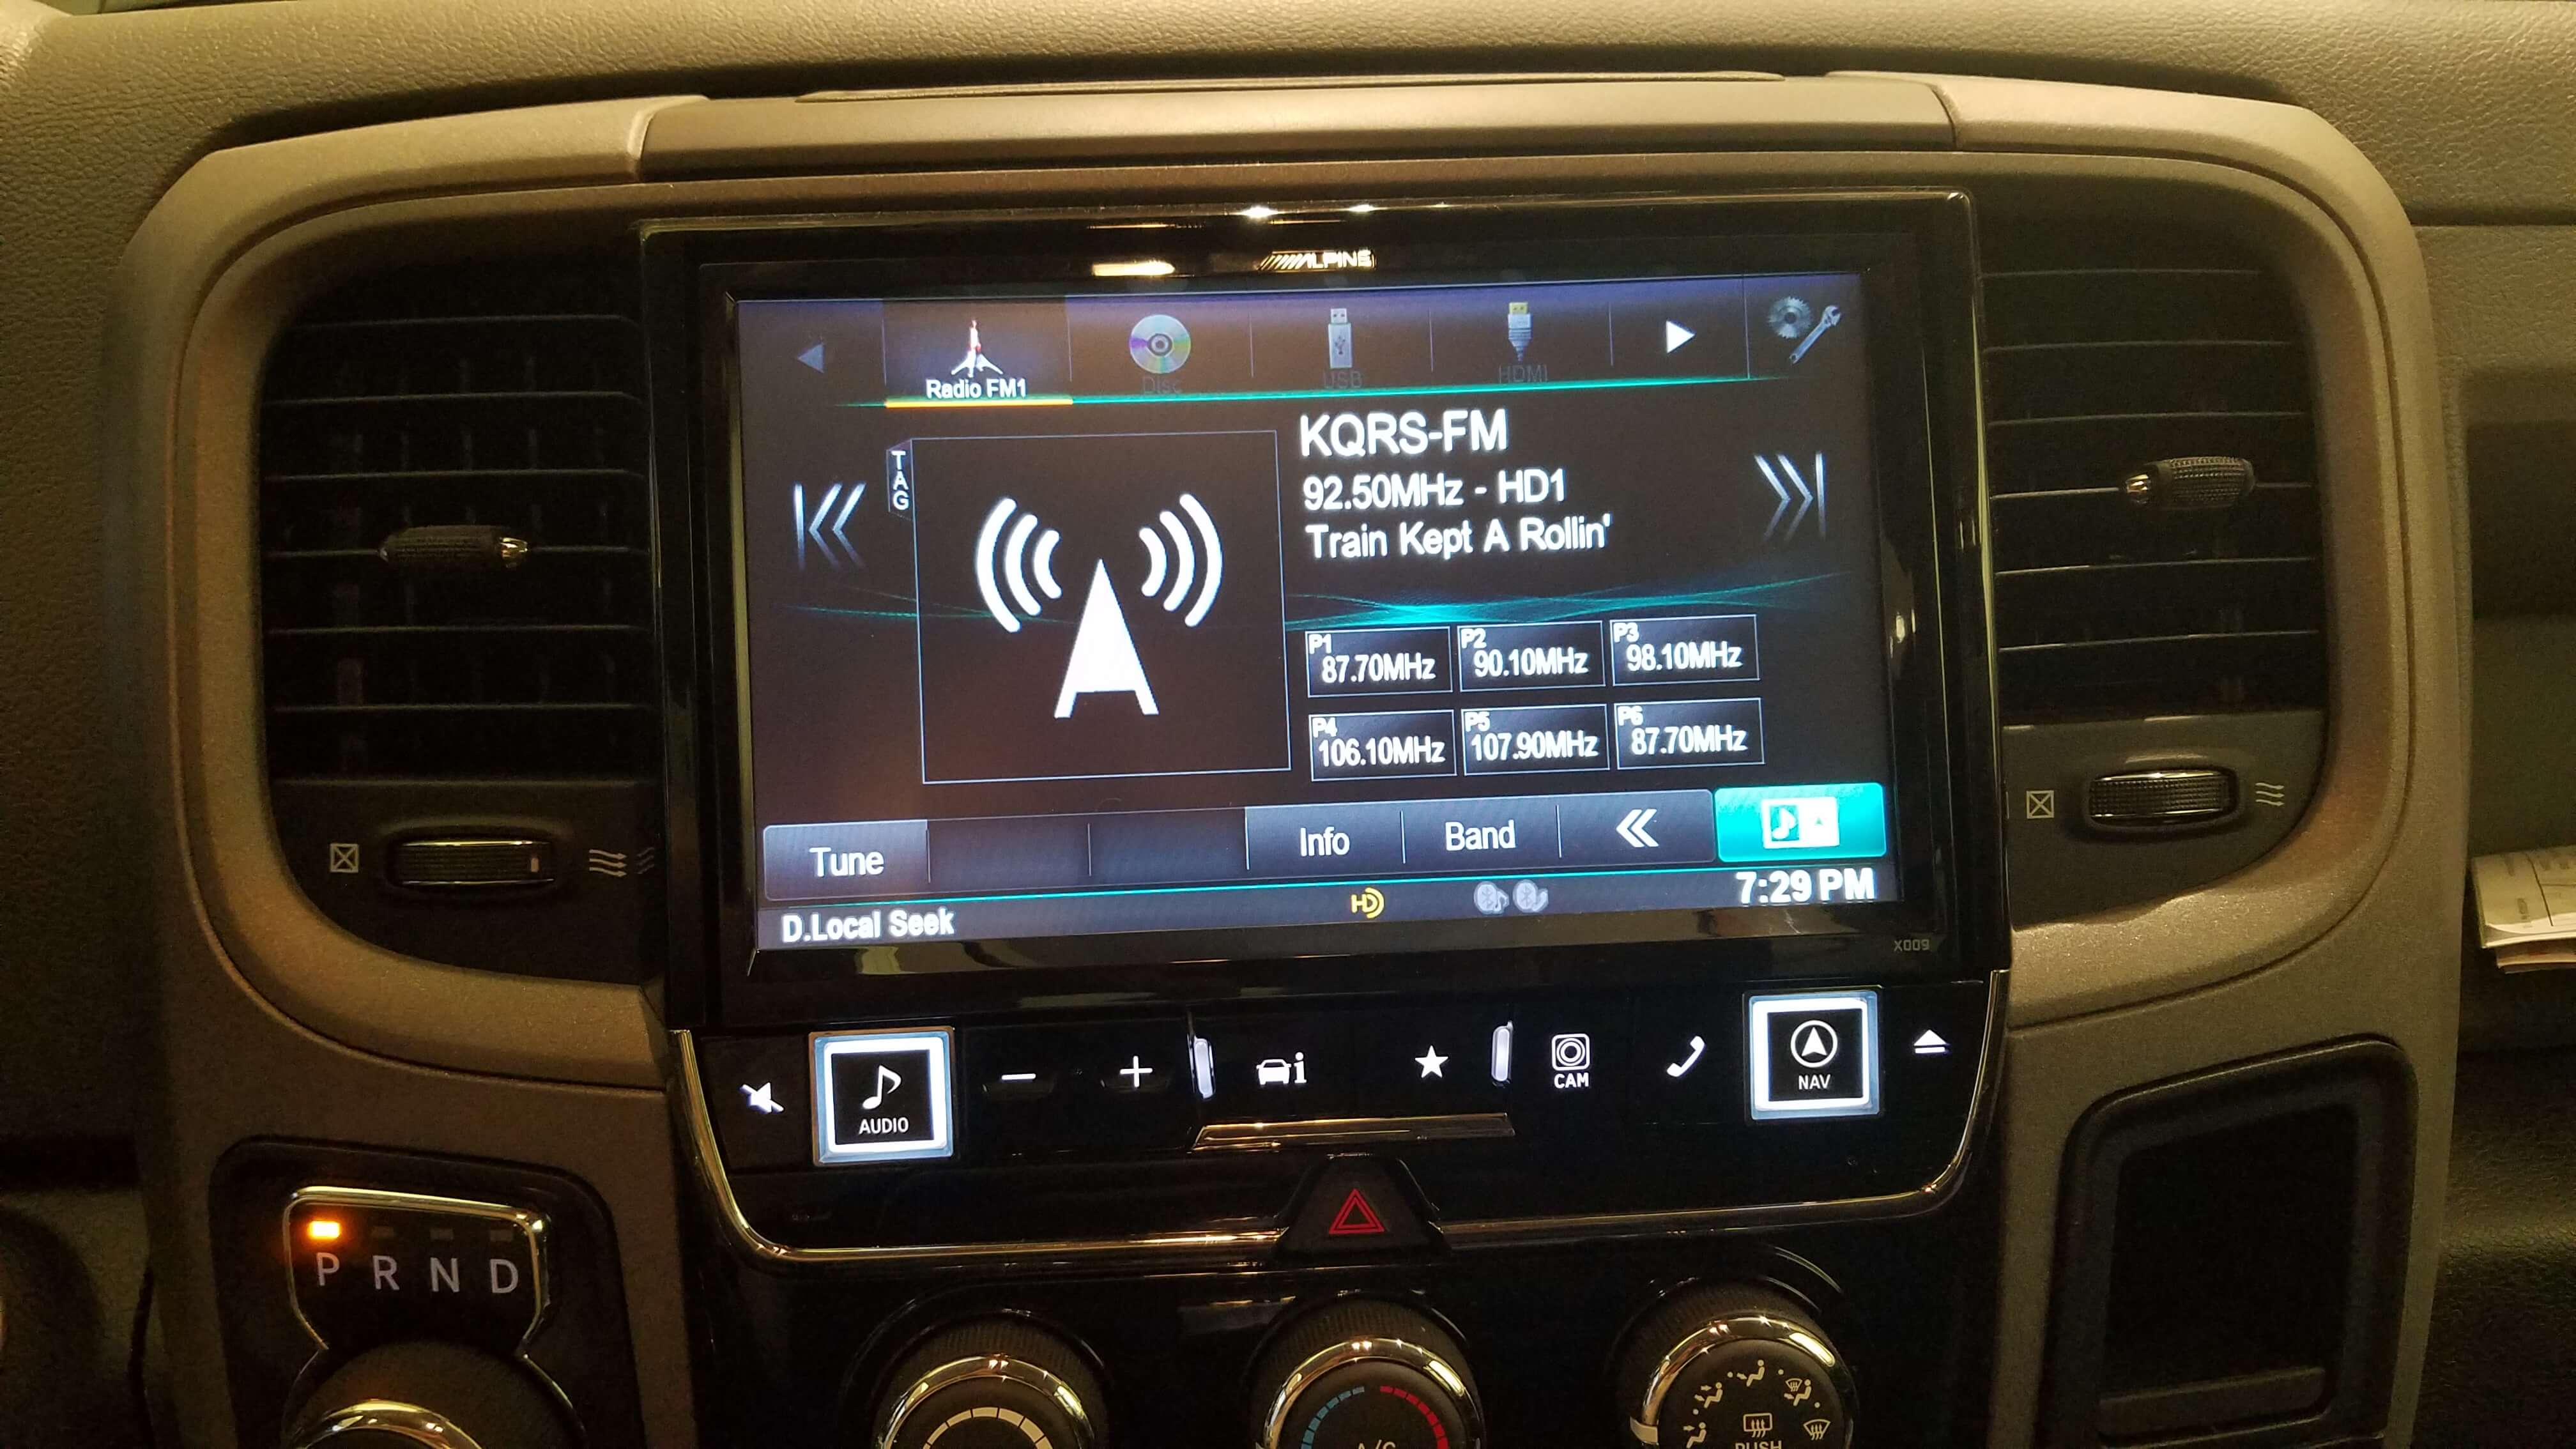 Alpine 9” in dash system - Uncompressed audio system, Navigation, smartphone connectivity, integrated accessory controls back up camera and vehicle system monitoring.  This system is designed specifically for your RAM and looks like it came from the factory with it.